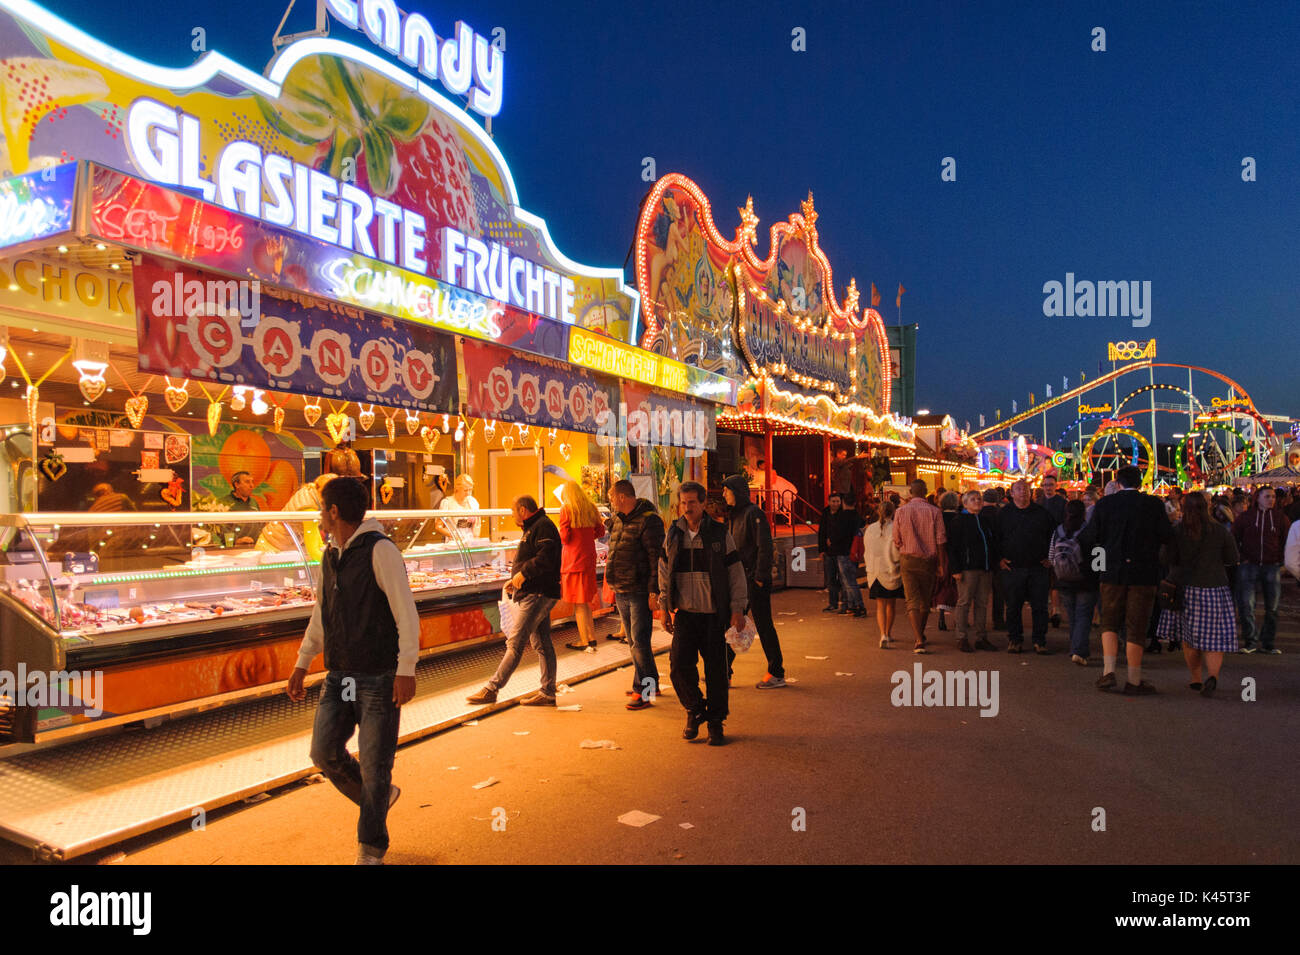 Oktoberfest in Munich is the biggest beer festival of the world with many huge beer tents, carousels, and amusement huts Stock Photo